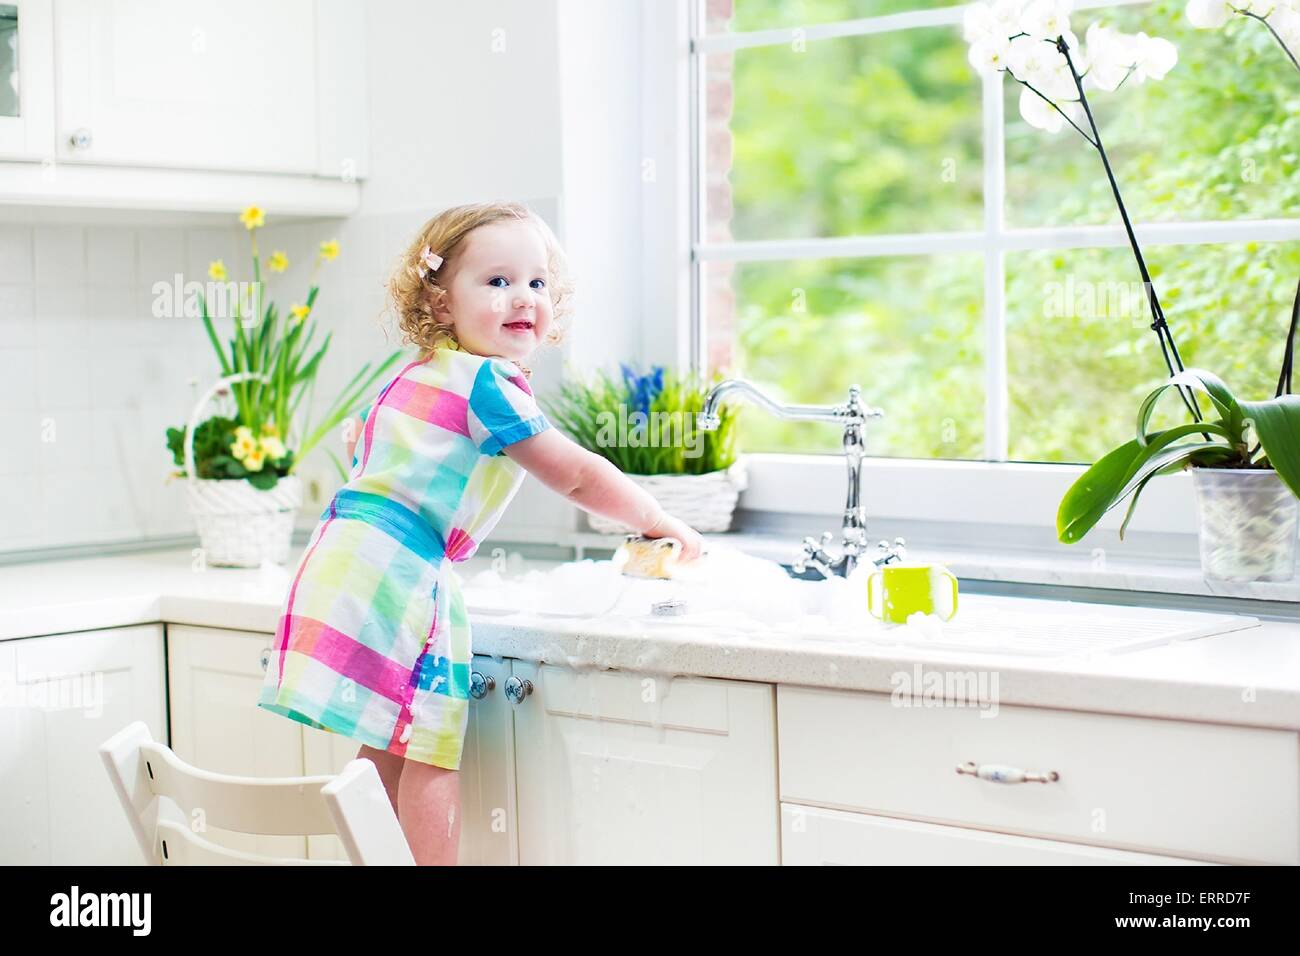 Cute curly toddler girl in a colorful dress washing dishes, cleaning with a sponge and playing with foam in the sink in kitchen Stock Photo